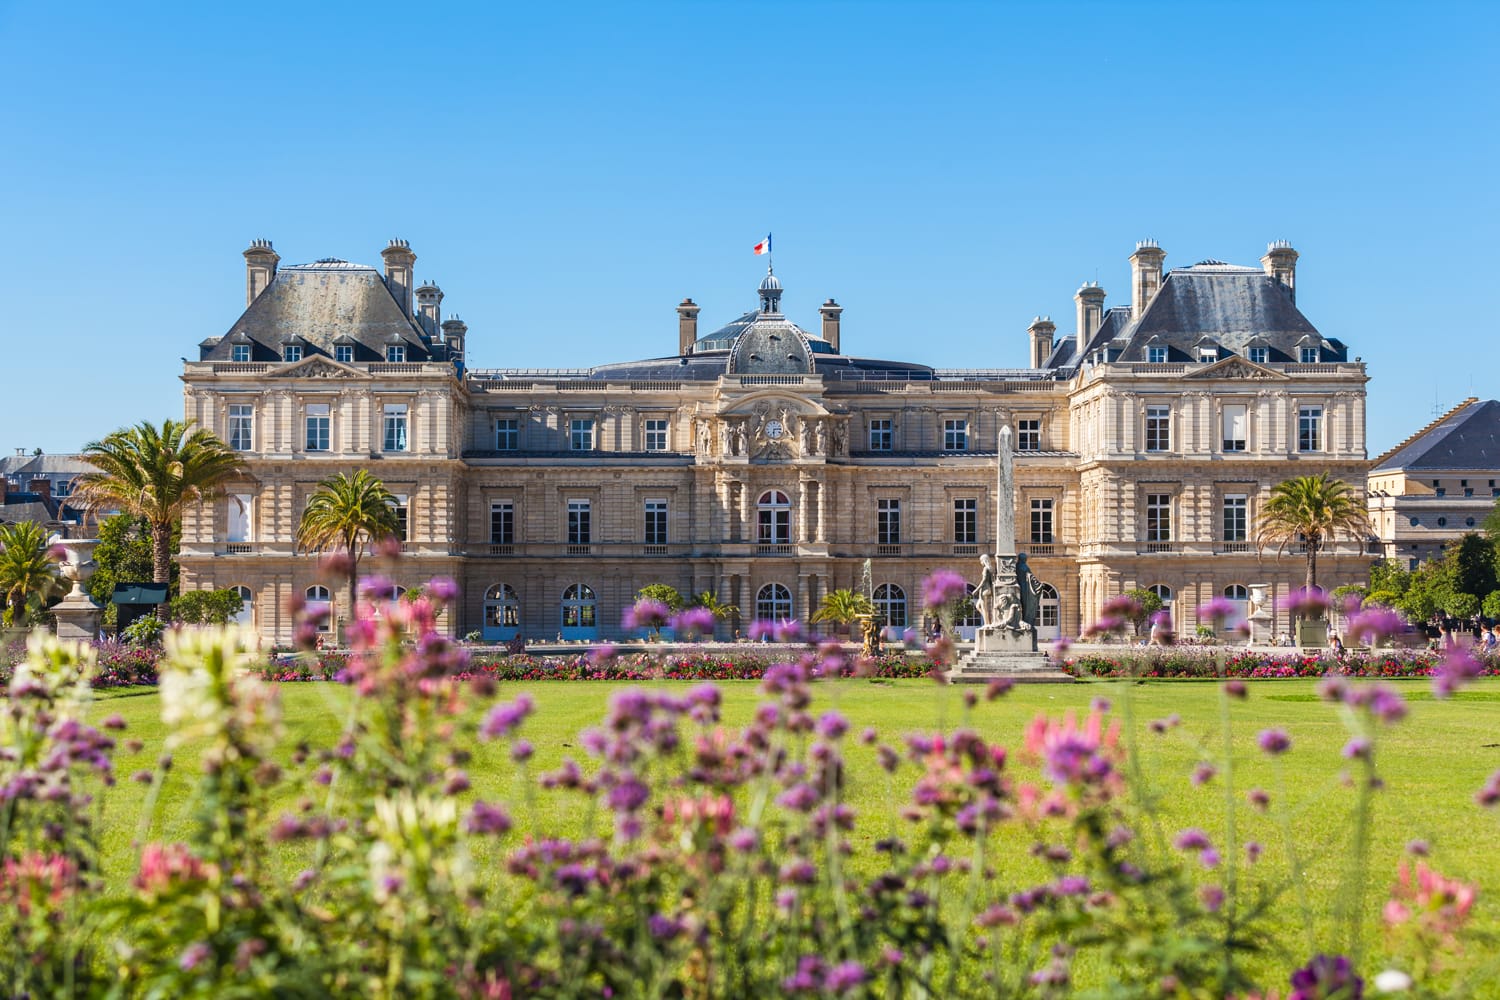 Luxembourg Palace in Jardin du Luxembourg, Paris, France